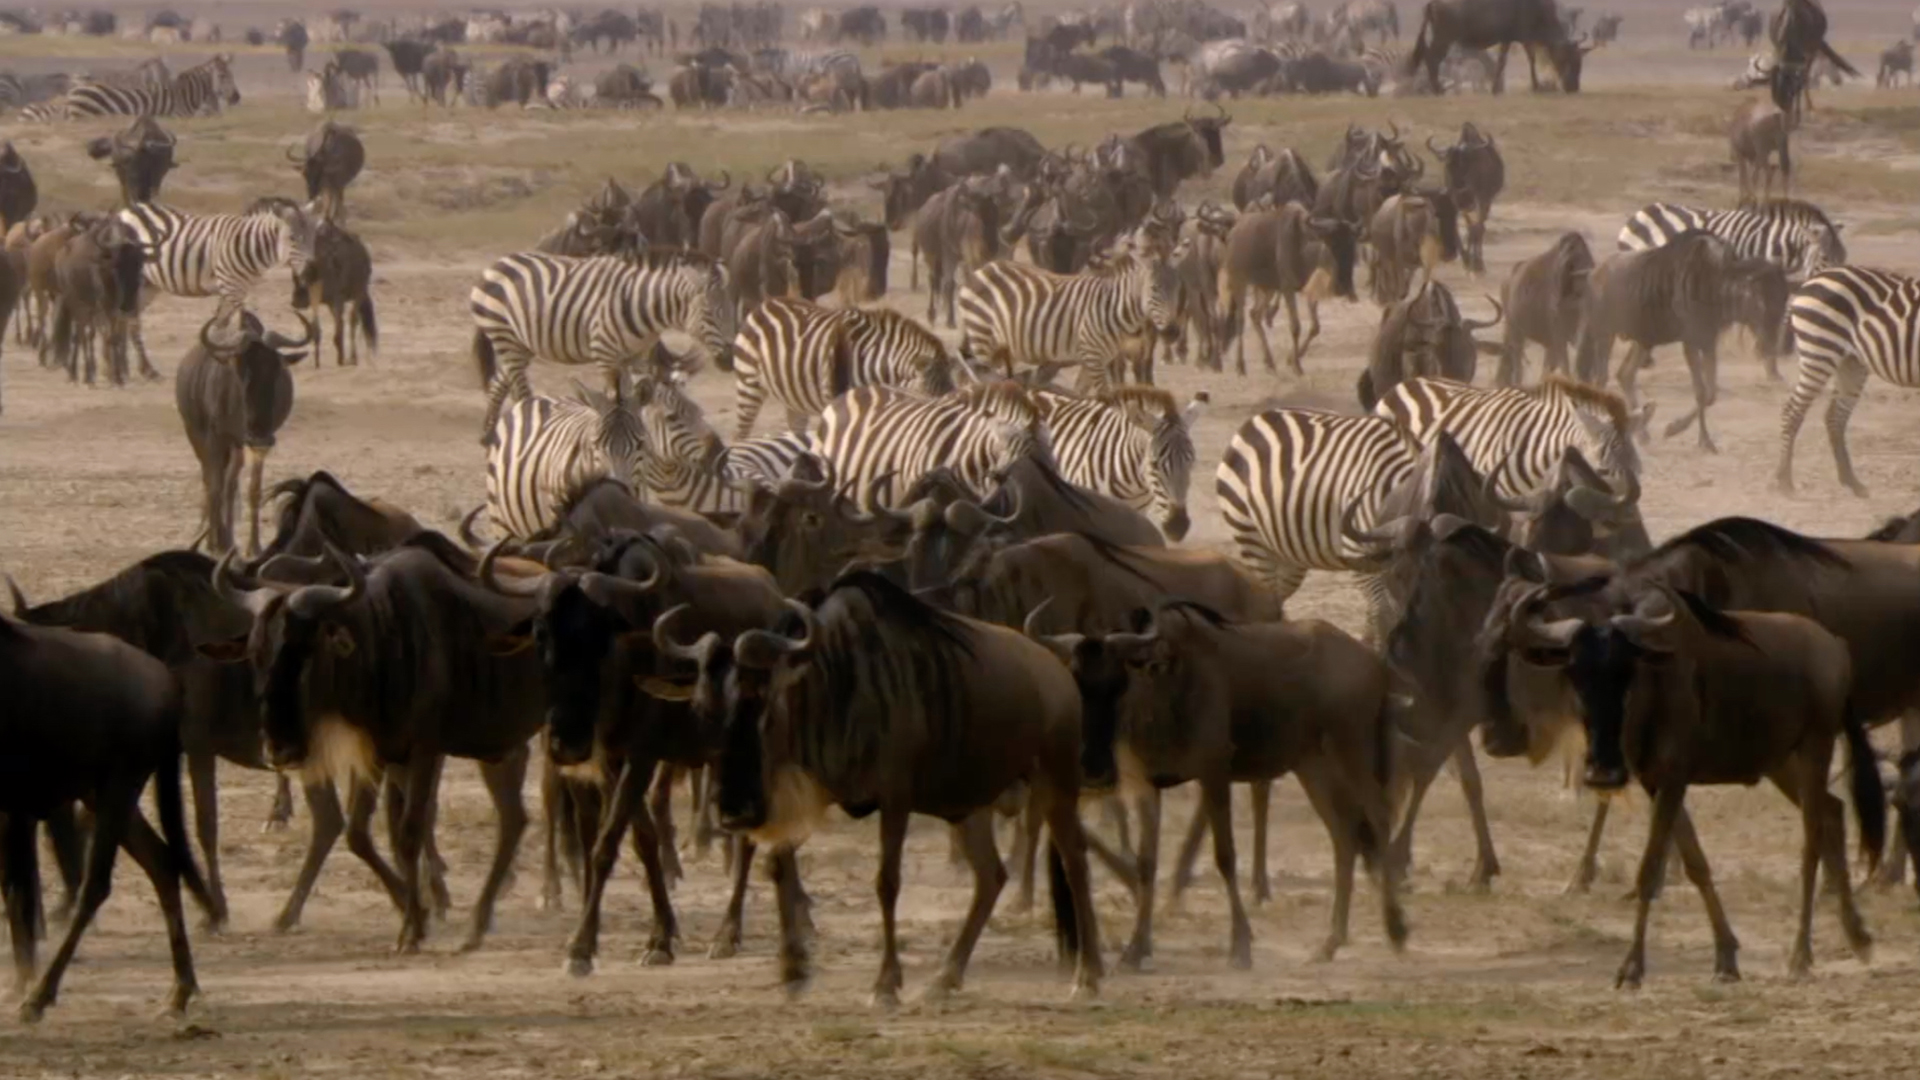 Zebra and wildebeest herds on migration path. This is from Zebras of the Serengeti. [Photo of the day - May 2022]